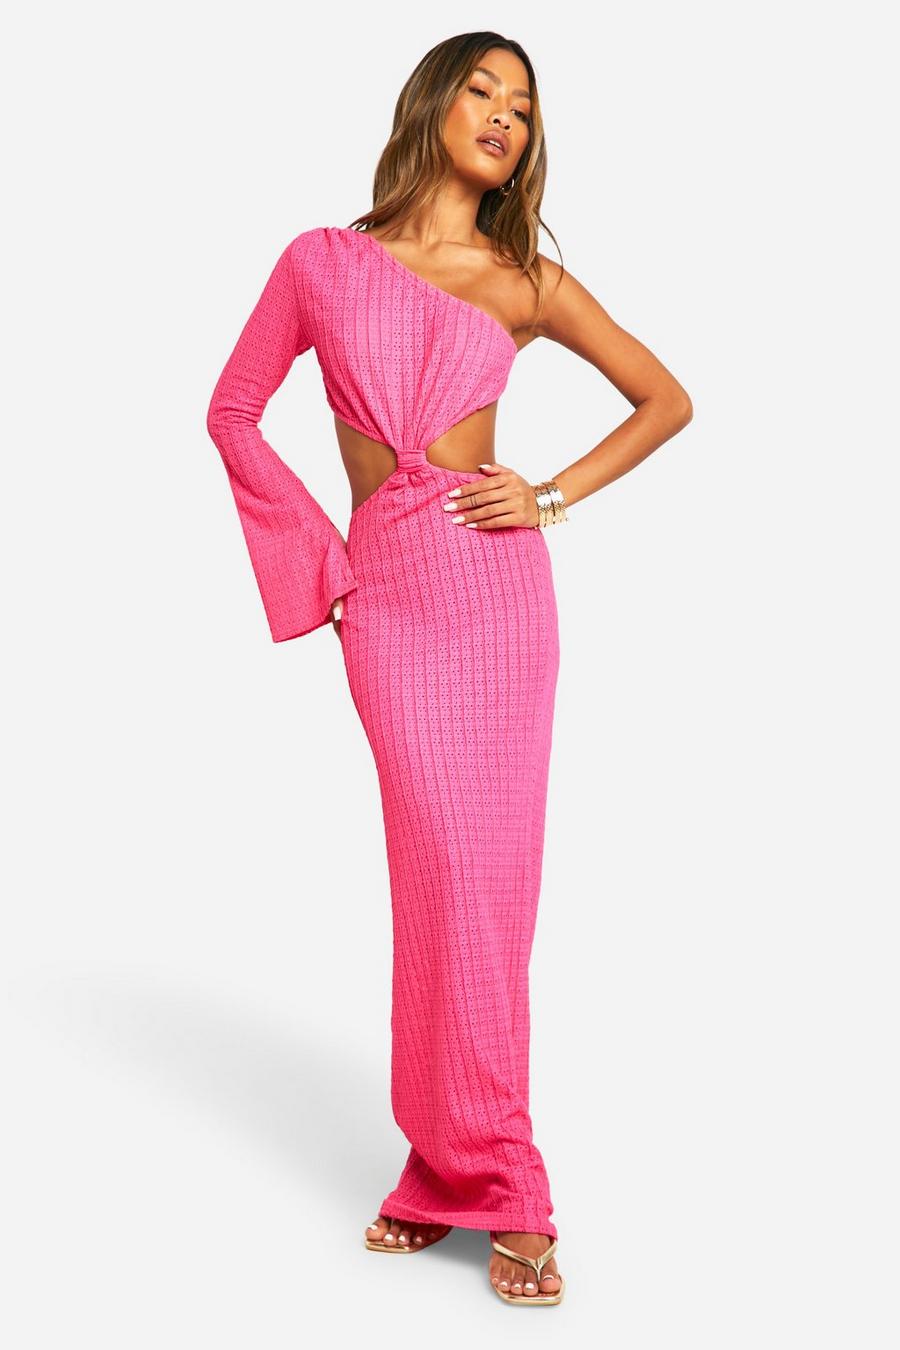 Hot pink Textured Knot Detail One Shoulder Cut Out Maxi Dress